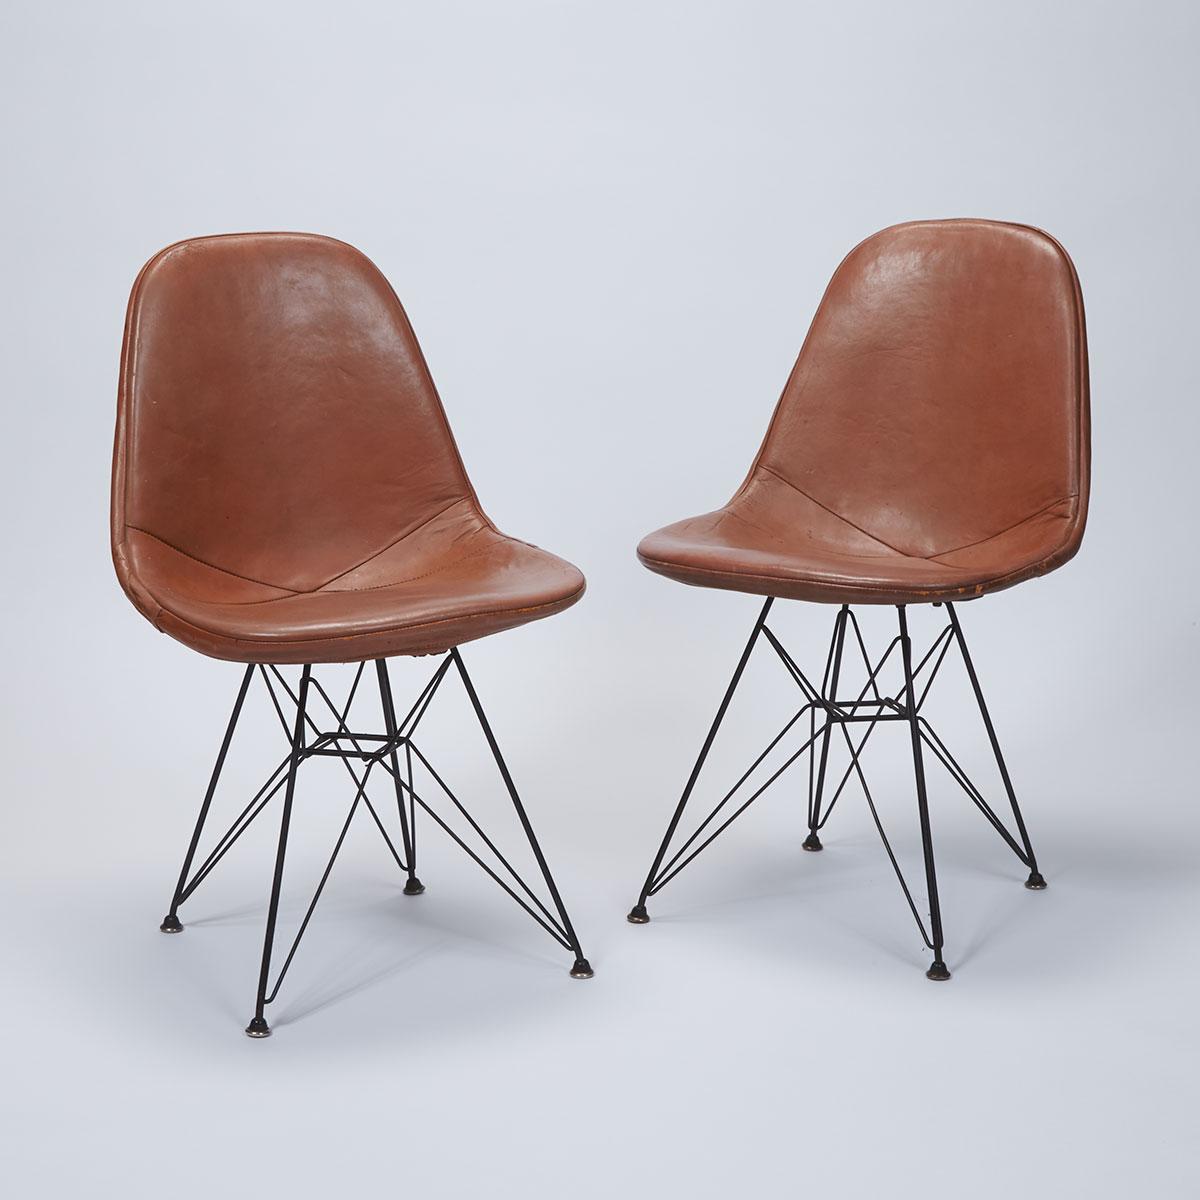 Pair of Eiffel Side Chairs by Charles and Ray Eames for Herman Miller